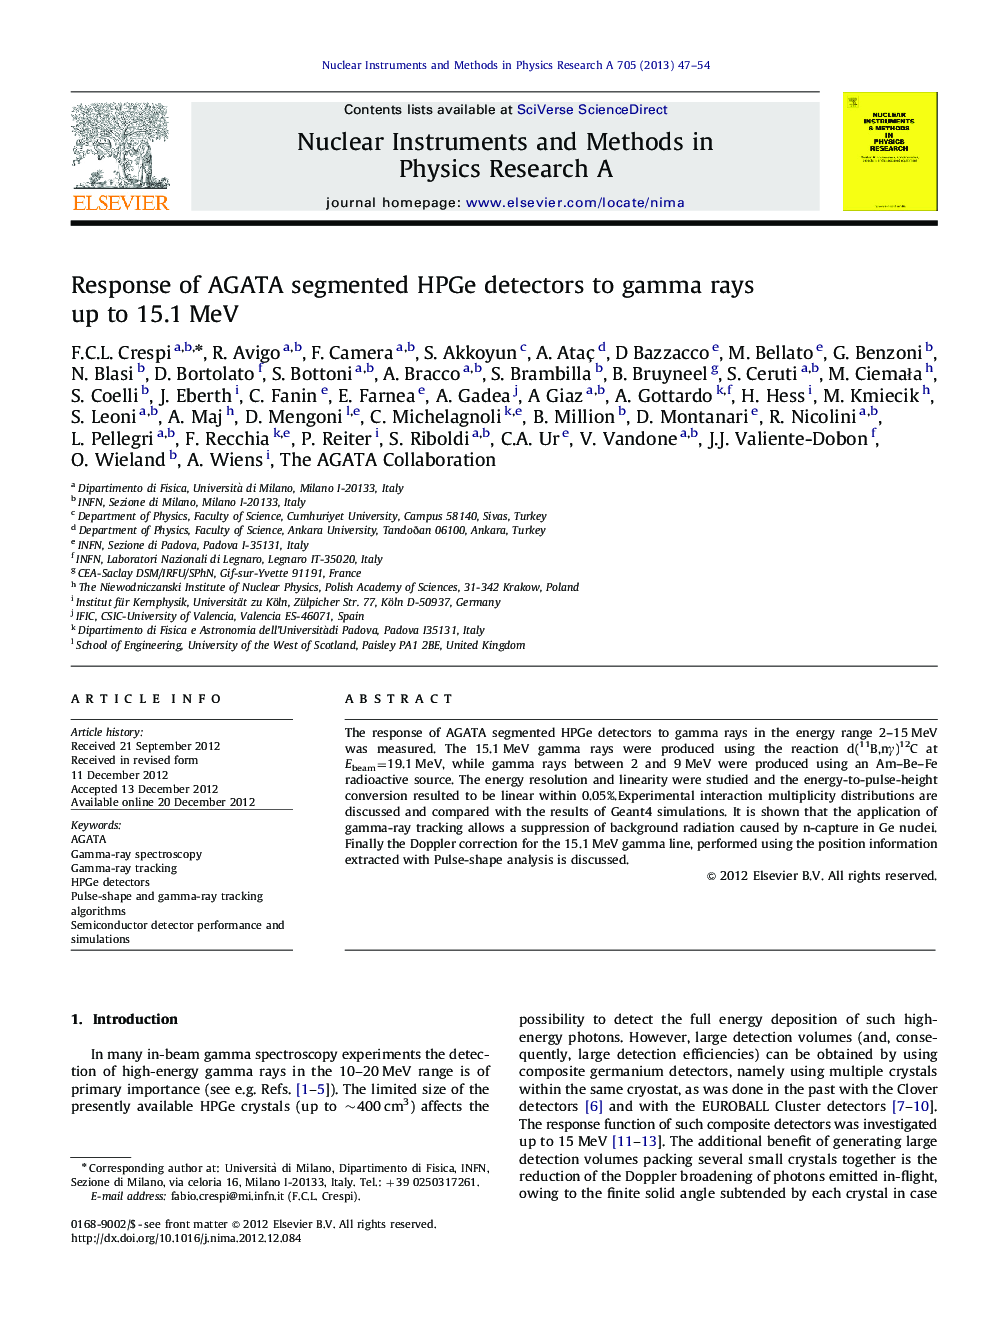 Response of AGATA segmented HPGe detectors to gamma rays up to 15.1Â MeV